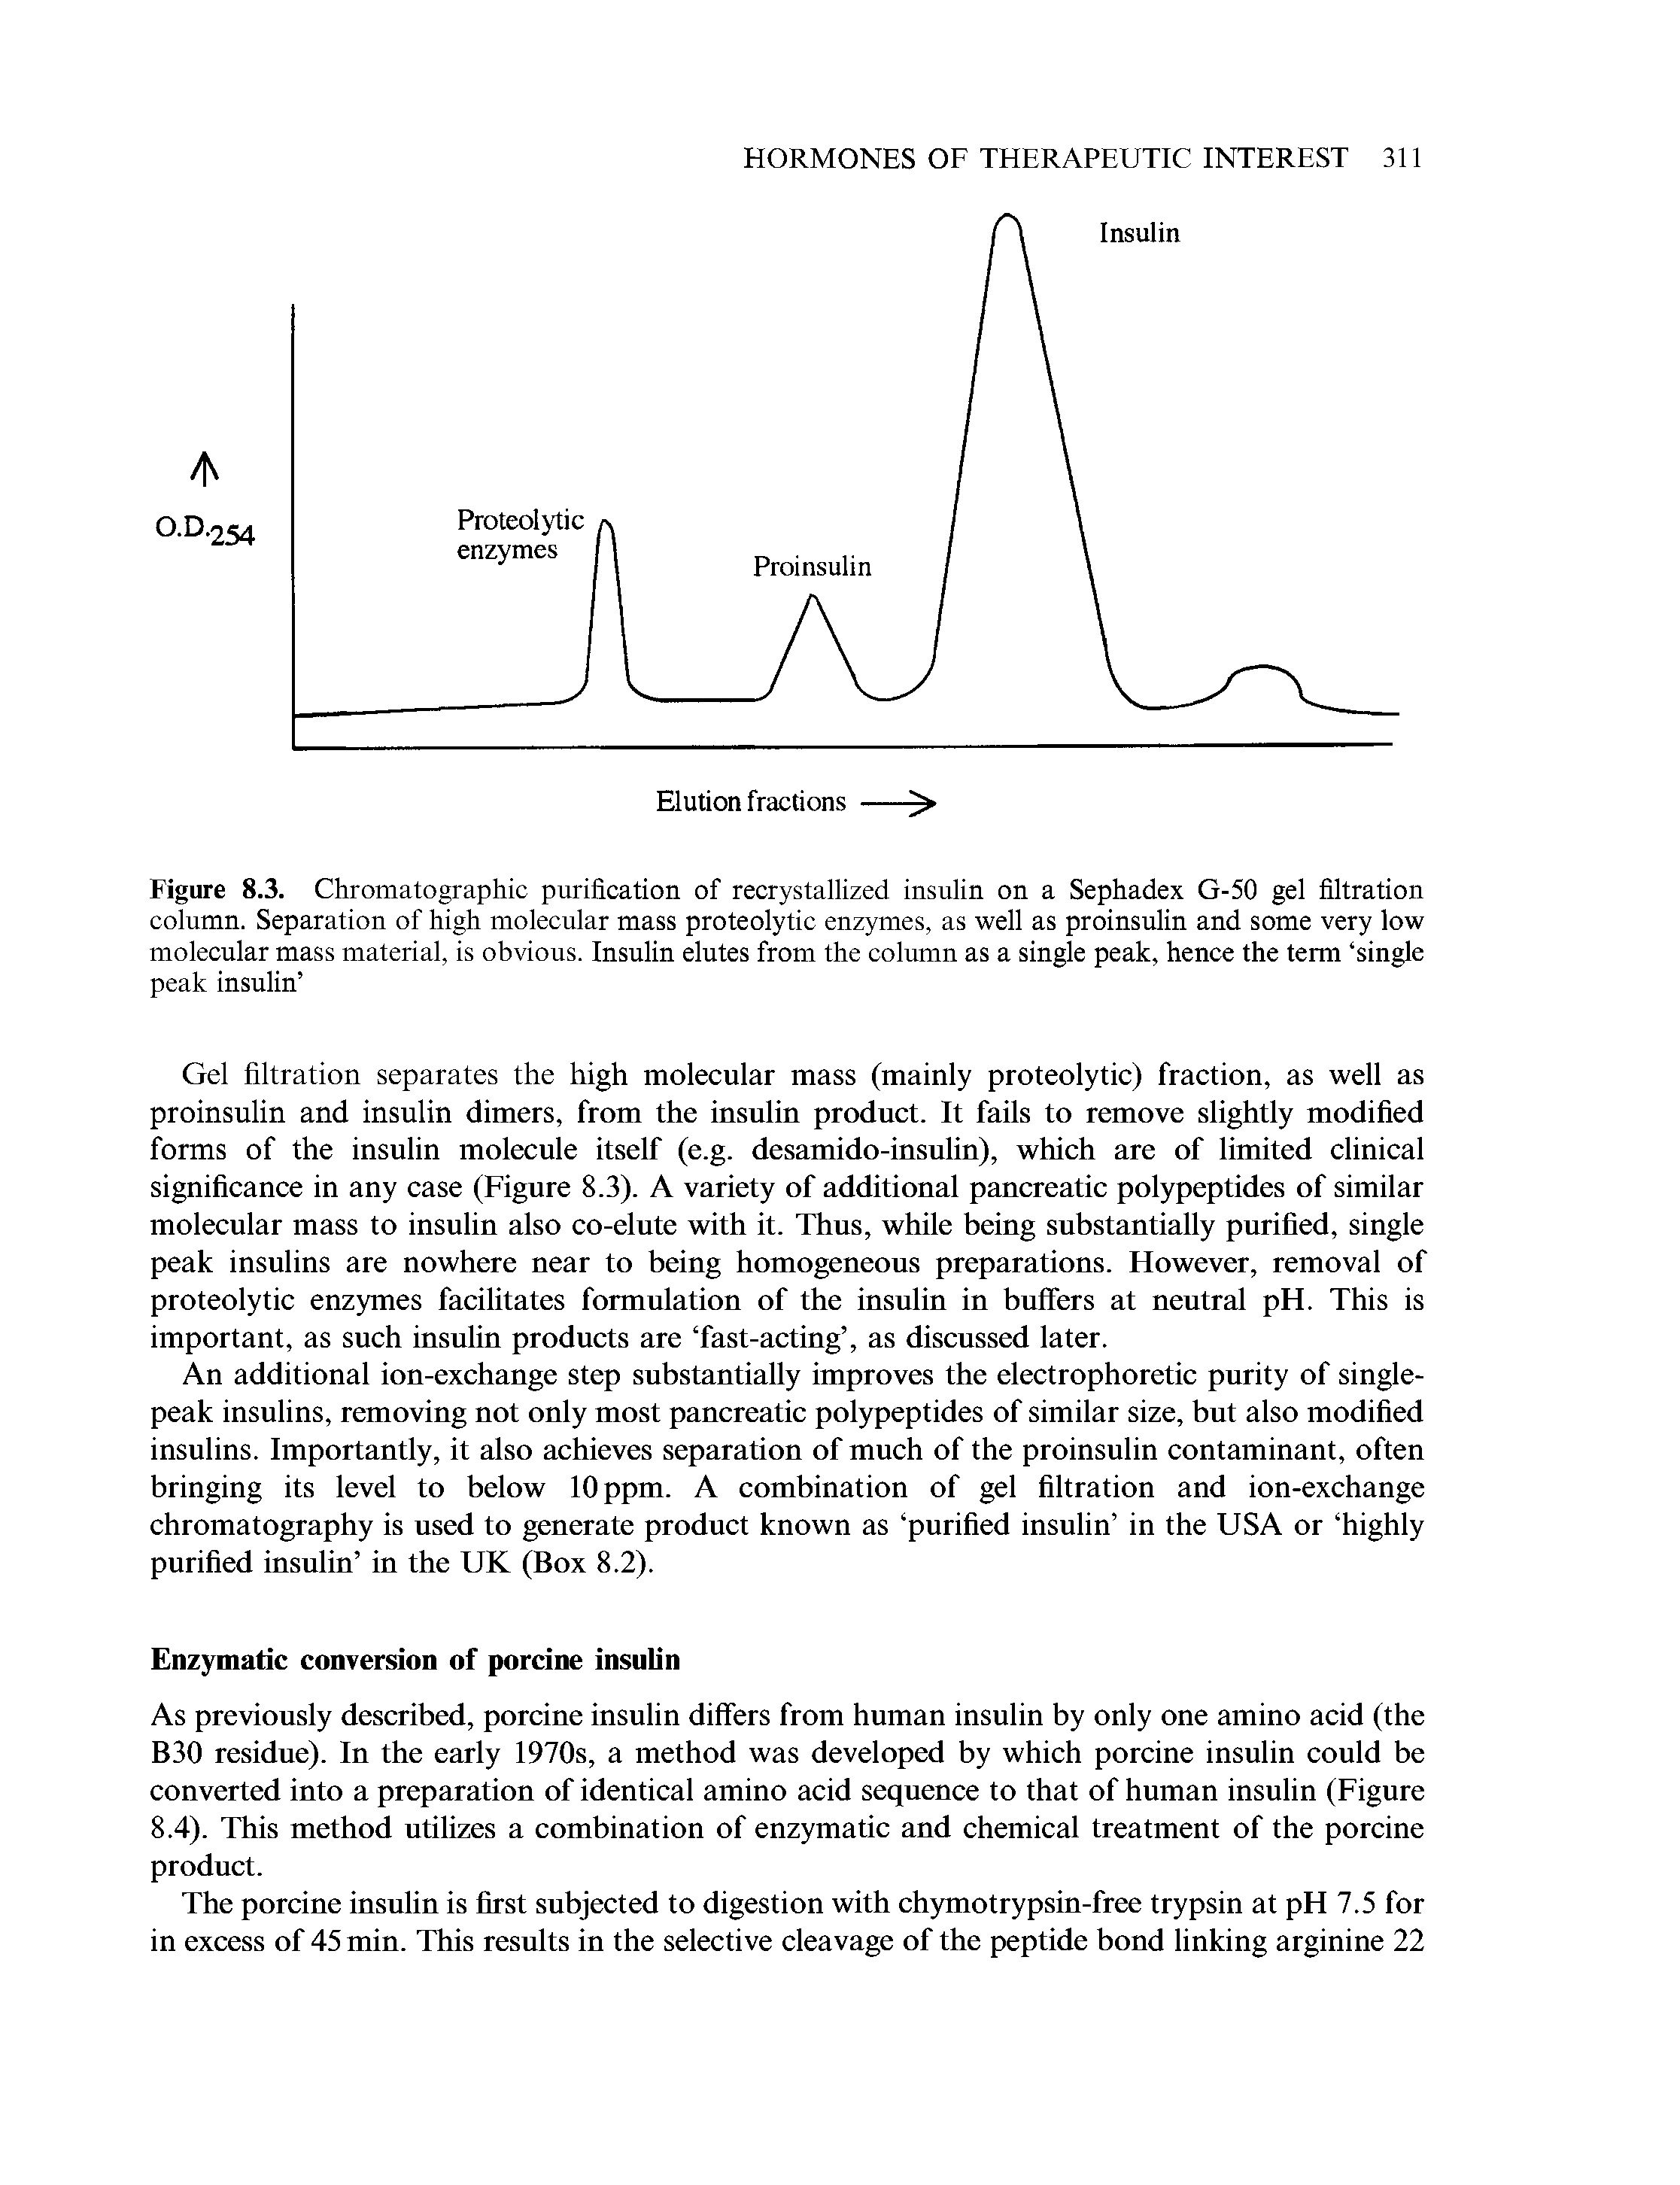 Figure 8.3. Chromatographic purification of recrystallized insulin on a Sephadex G-50 gel filtration column. Separation of high molecular mass proteolytic enzymes, as well as proinsulin and some very low molecular mass material, is obvious. Insulin elutes from the column as a single peak, hence the term single peak insulin ...